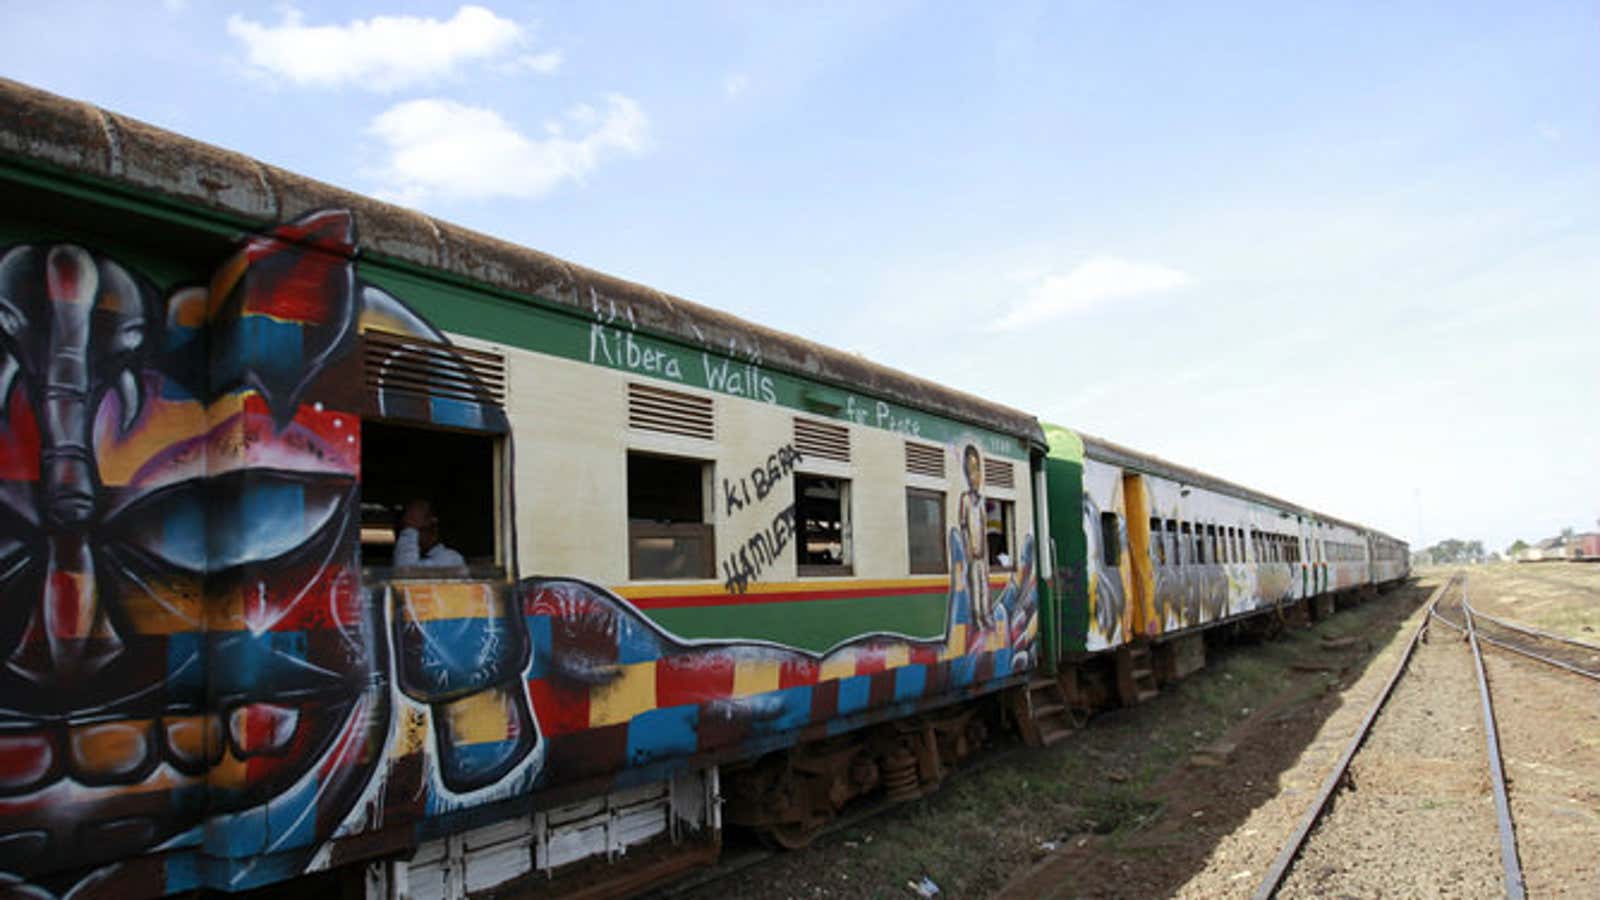 New African economic history is challenging earlier wisdom by showing, for example, that railways have had profound effects, both positive and negative on African societies.